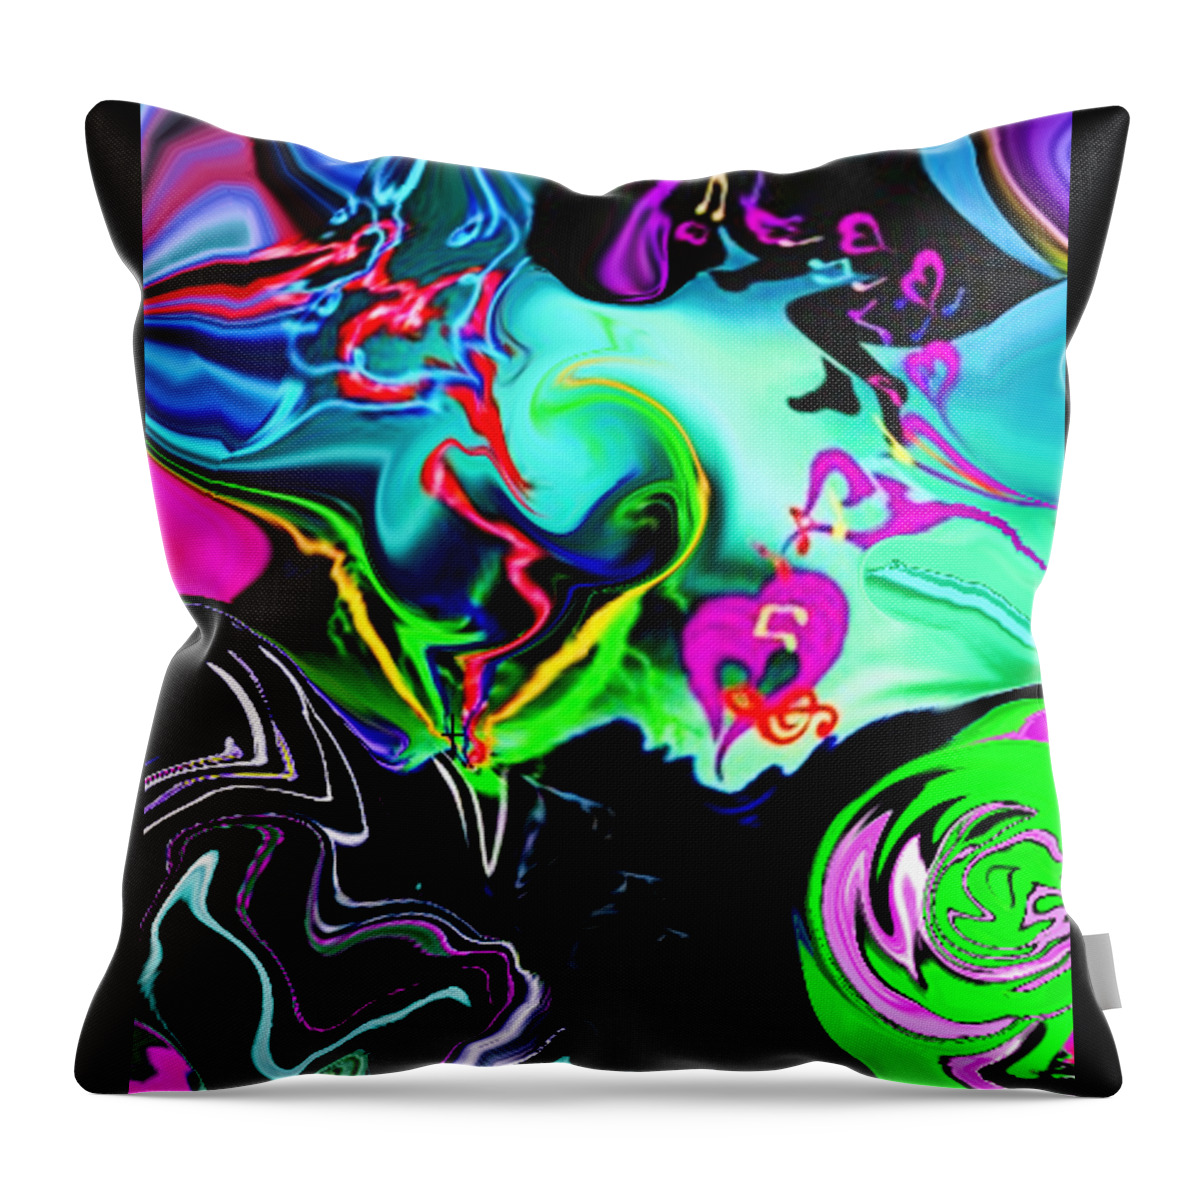 A Fathers Love Poem Throw Pillow featuring the digital art A Fathers Love Lullaby Remix by Stephen Battel